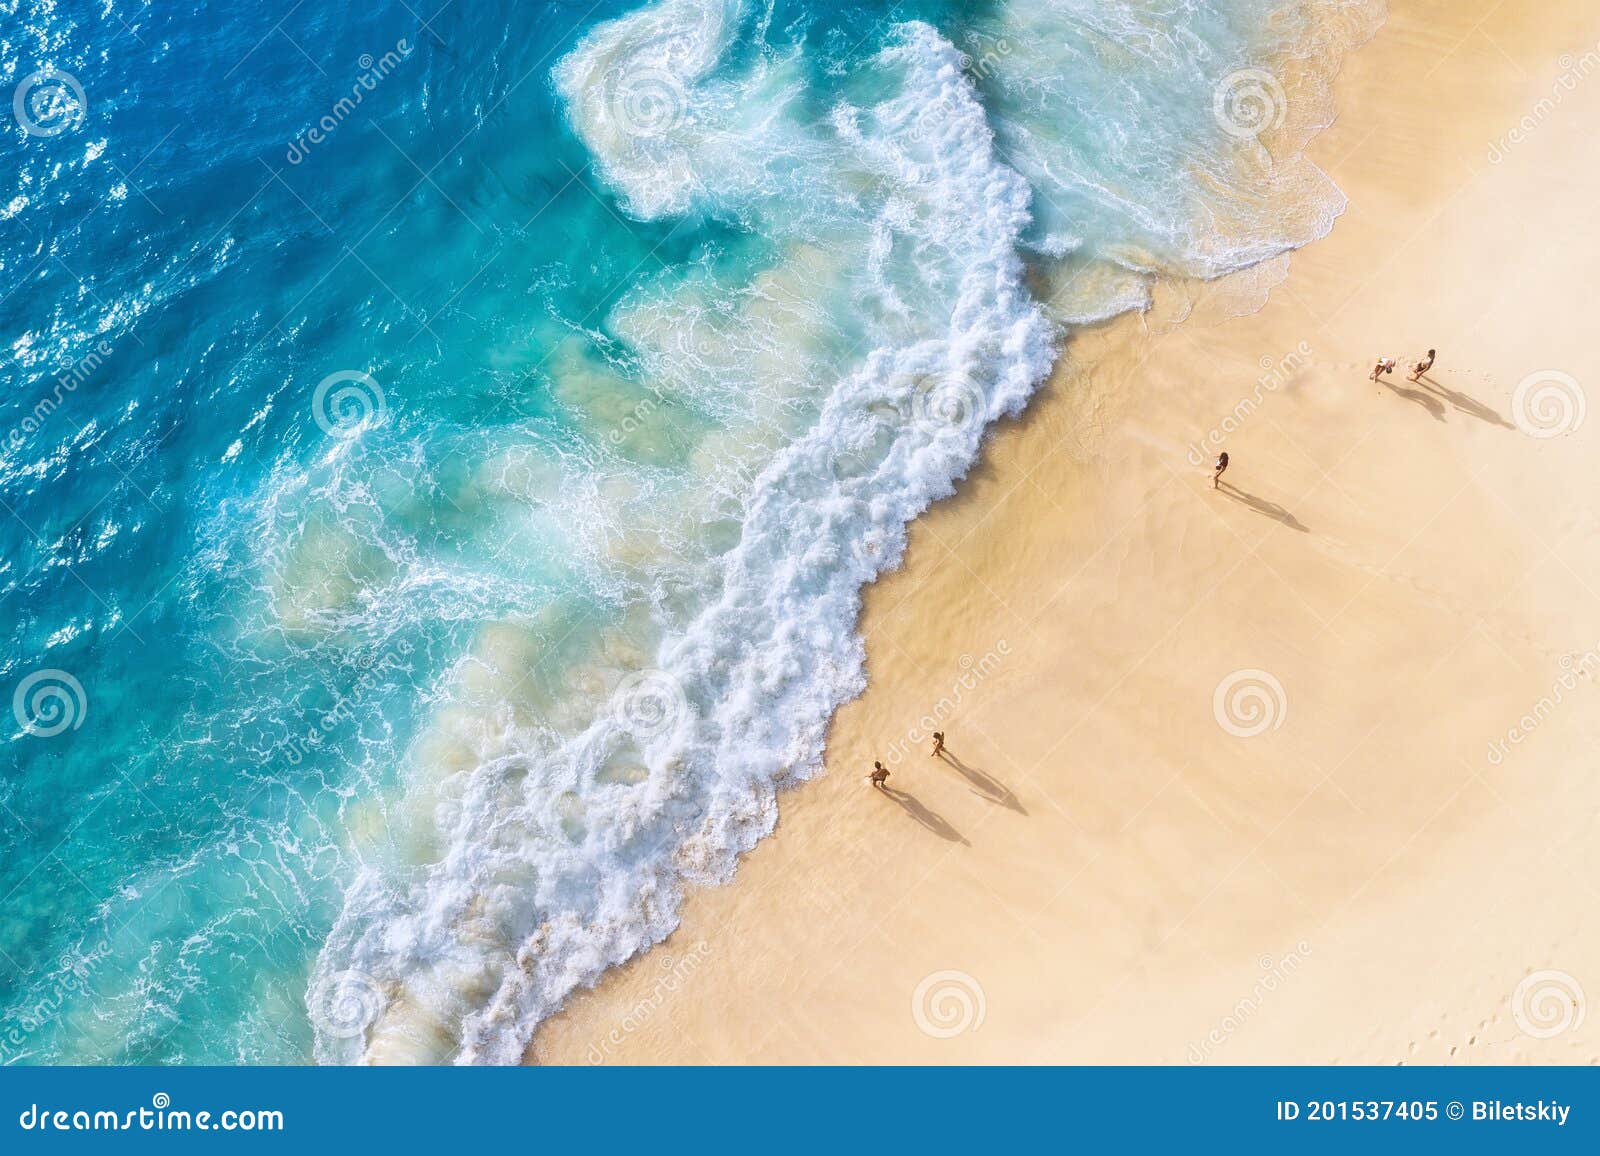 beach and large ocean waves. coast as a background from top view. blue water background from drone. summer seascape from air.